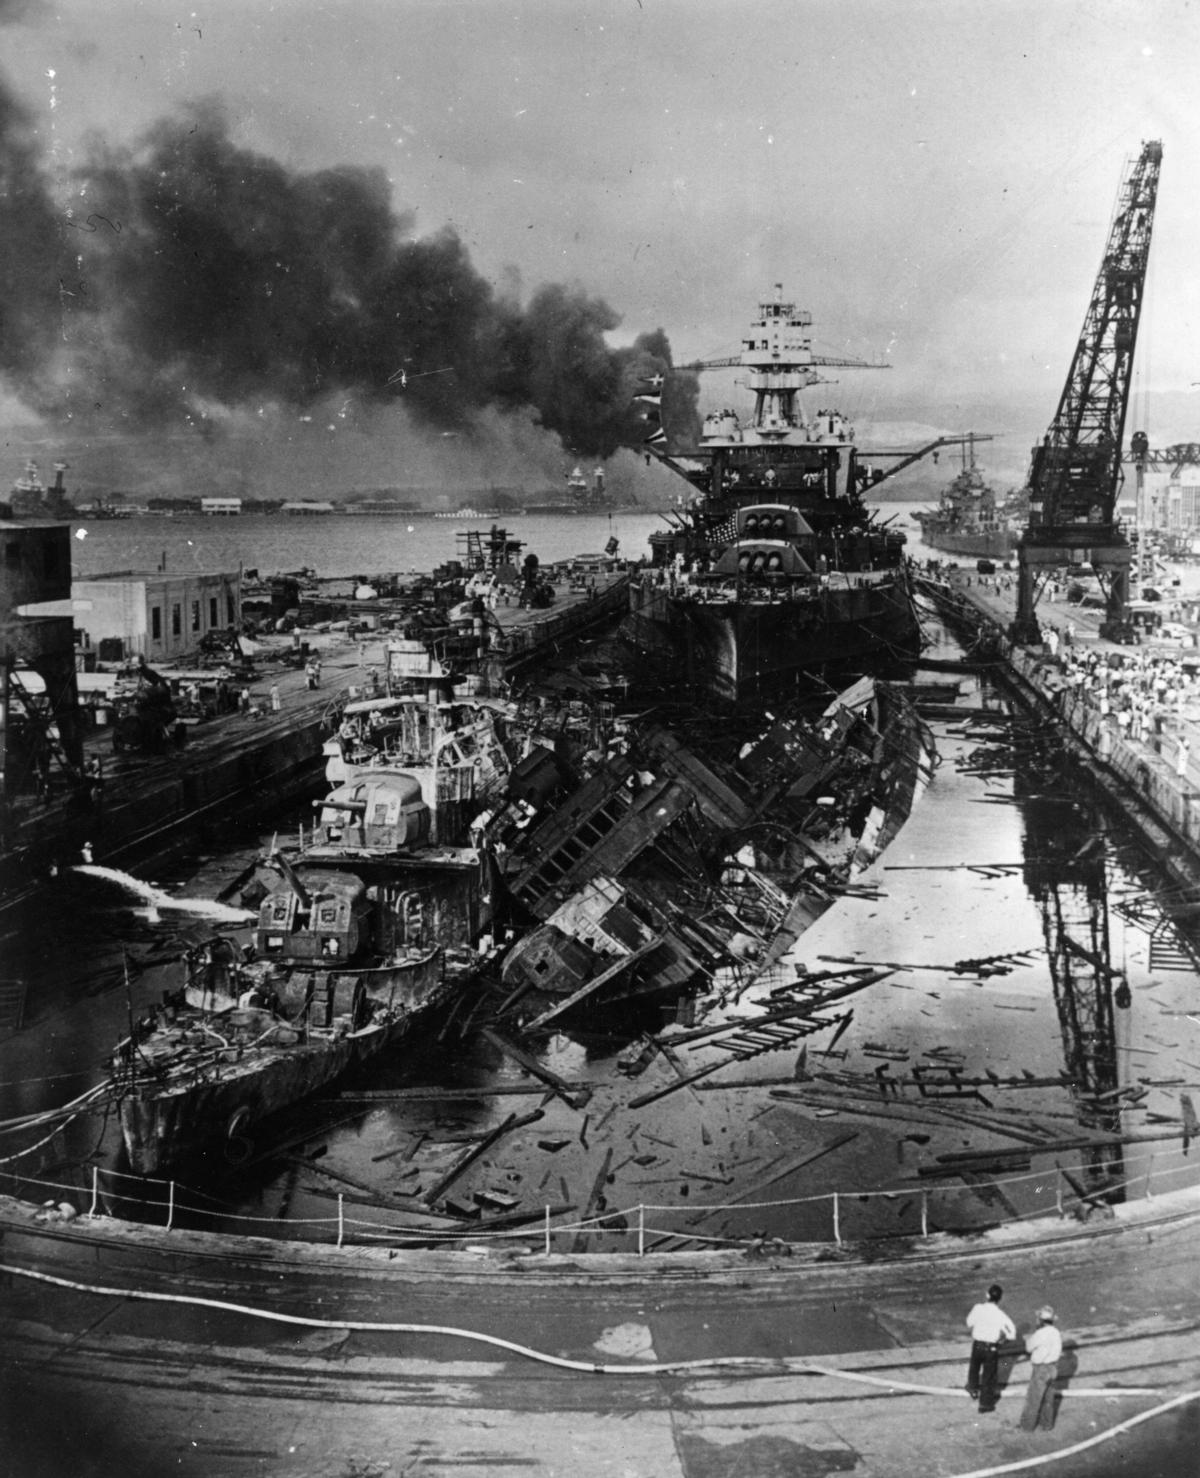 The remains of the destroyers USS Downes and USS Cassin in front of the battleship USS Pennsylvania at Pearl Harbor, pictured in December 1941 (Fox Photos/Getty Images)